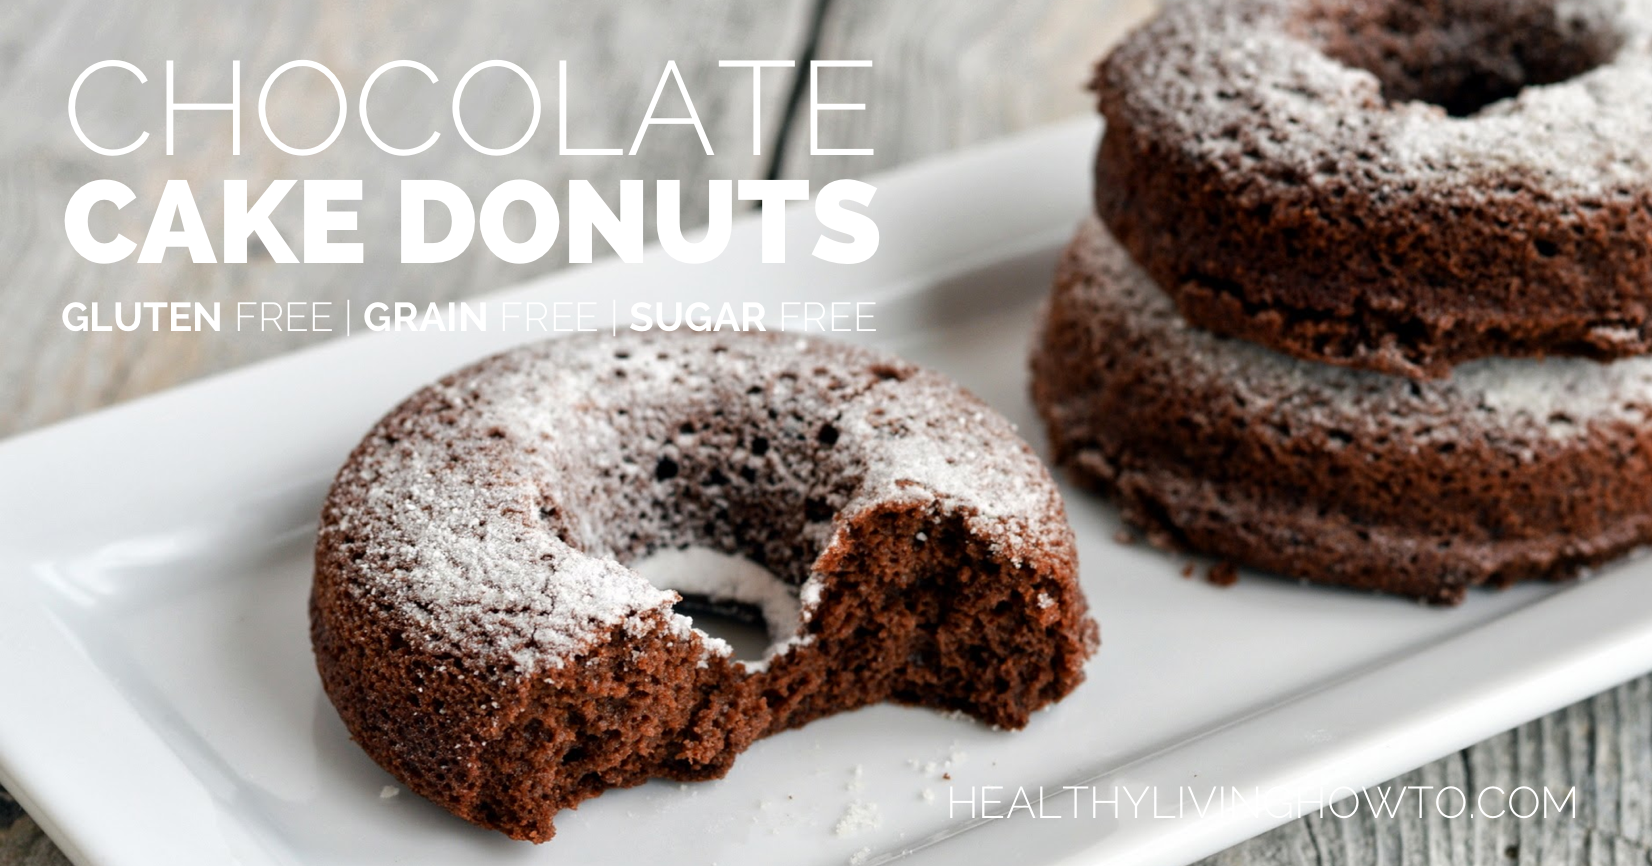 Chocolate Cake Donuts | healthylivinghowto.com